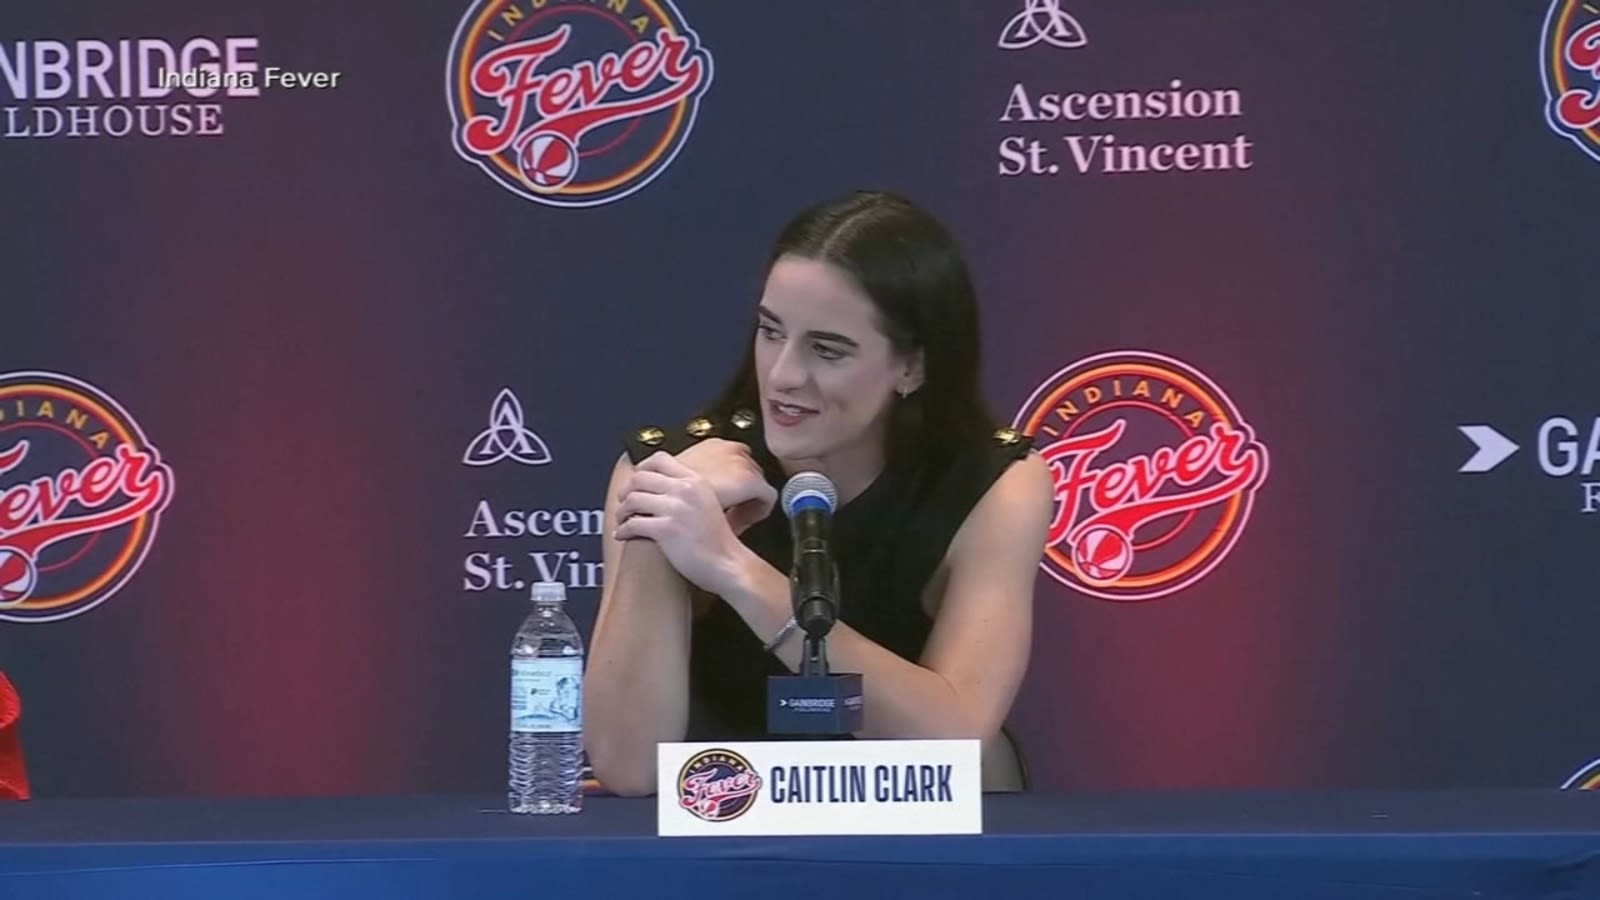 IndyStar columnist won't cover Indiana Fever games after exchange with Caitlin Clark